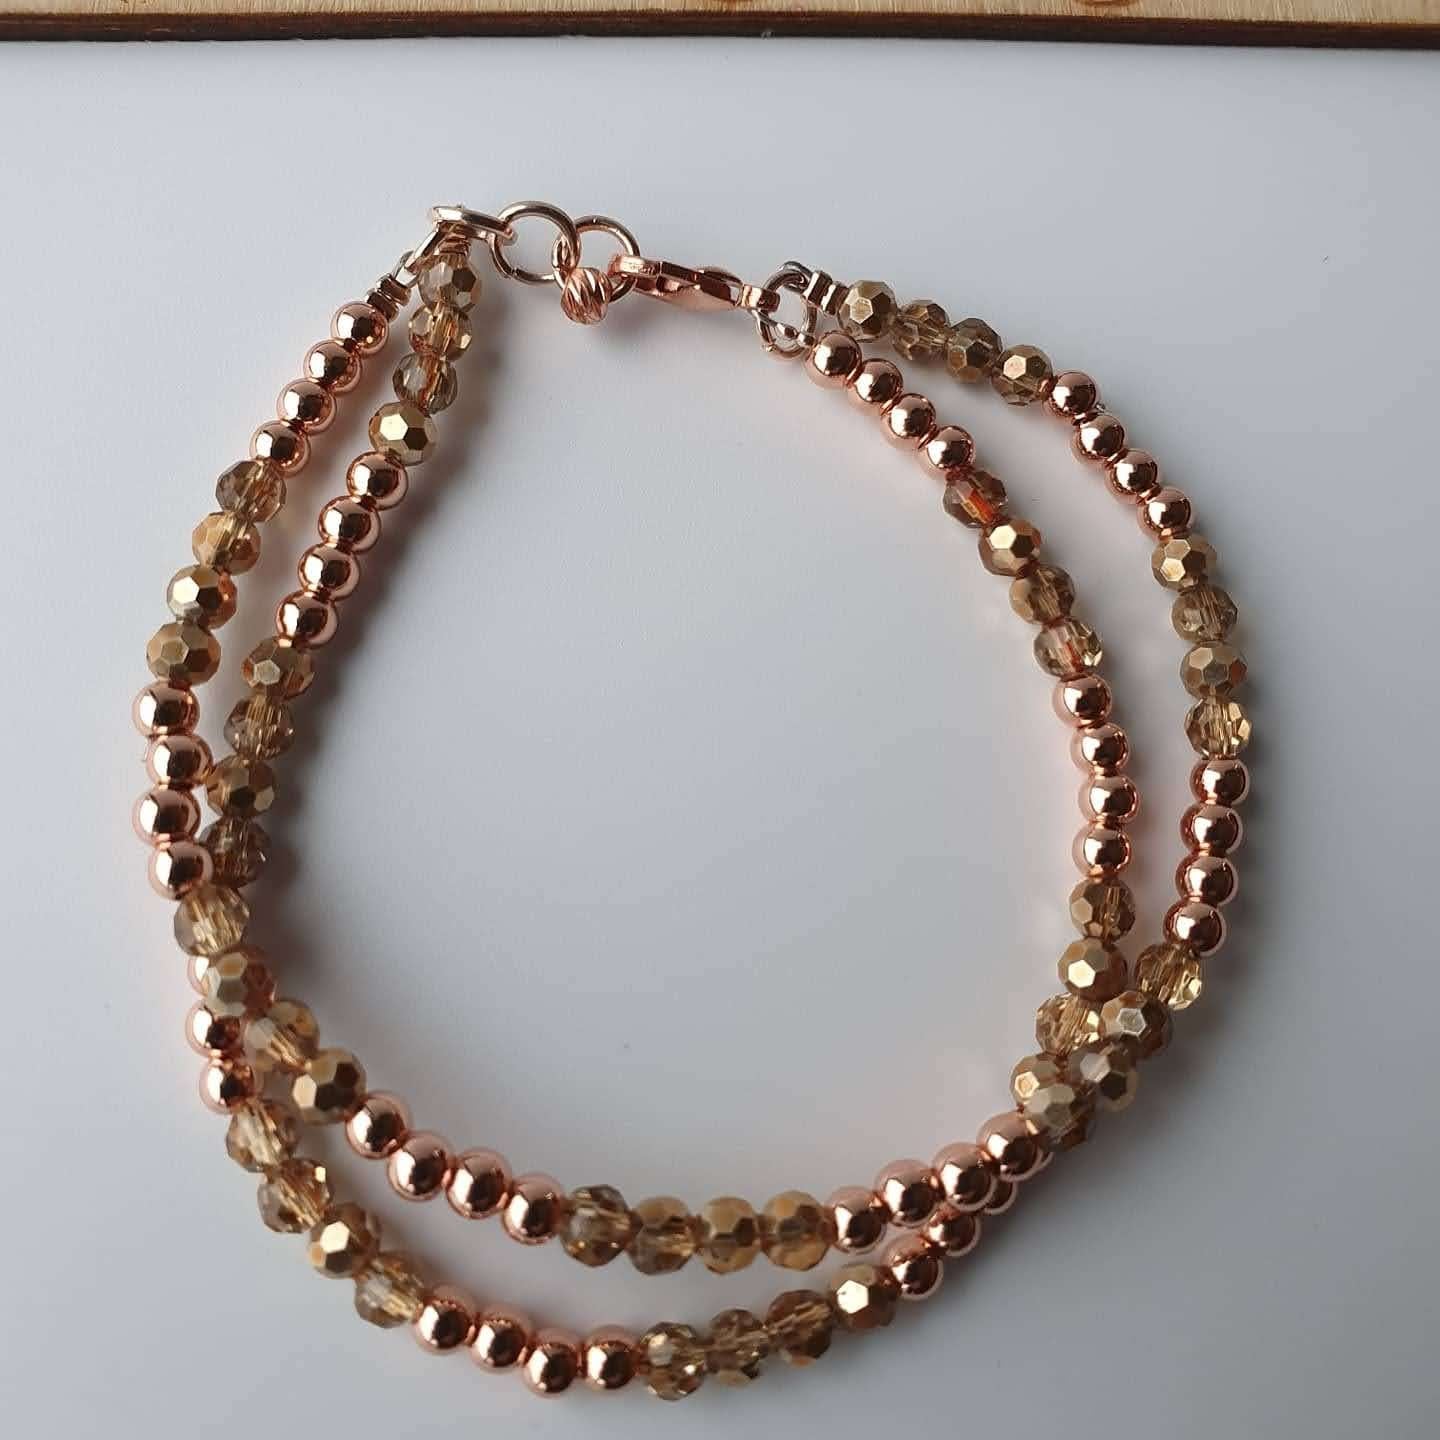 This is a picture of a gold and rose gold bracelet 